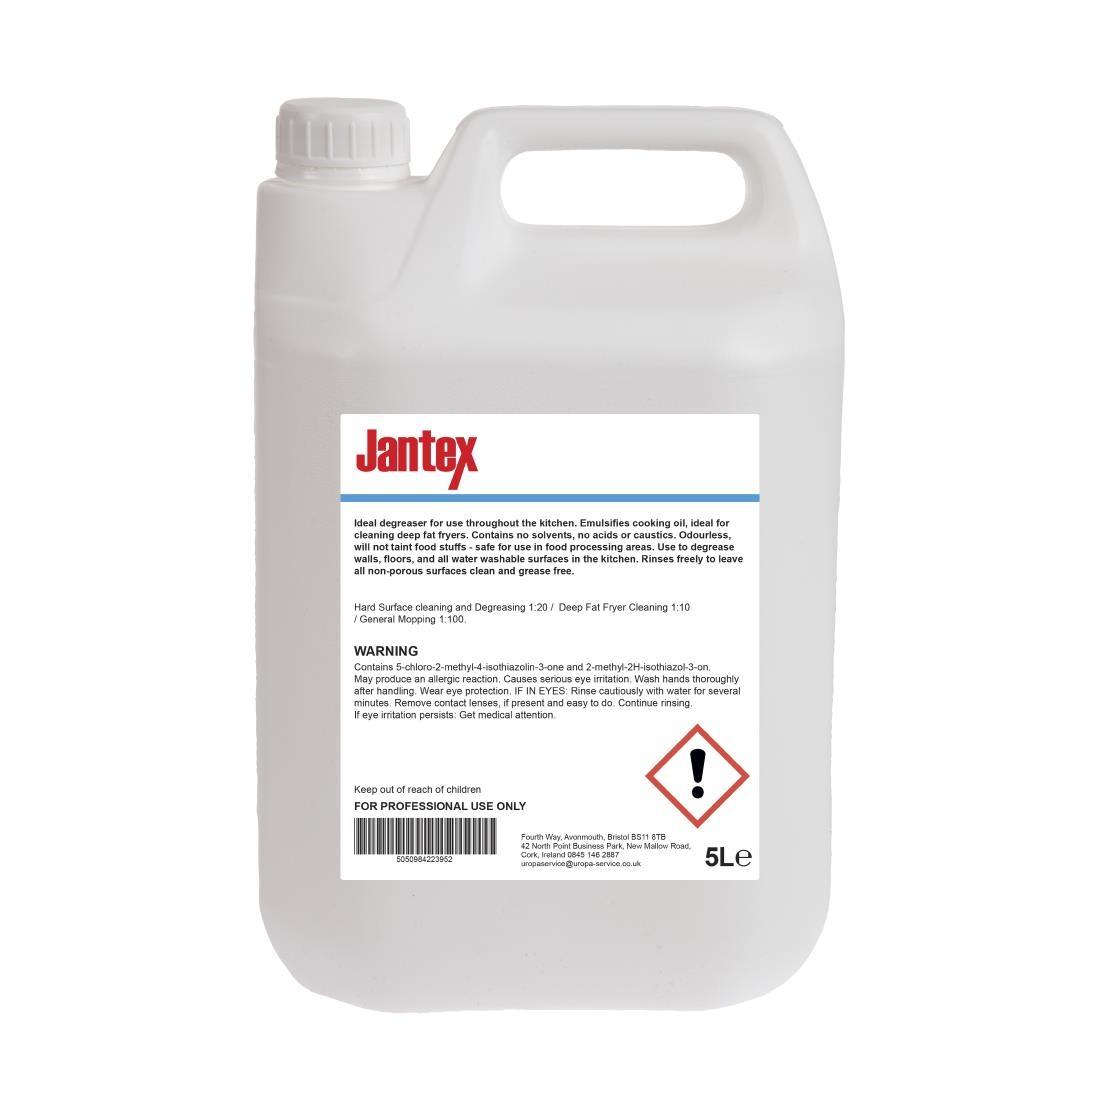 Jantex Kitchen Degreaser Concentrate 5Ltr - CF974  - 2